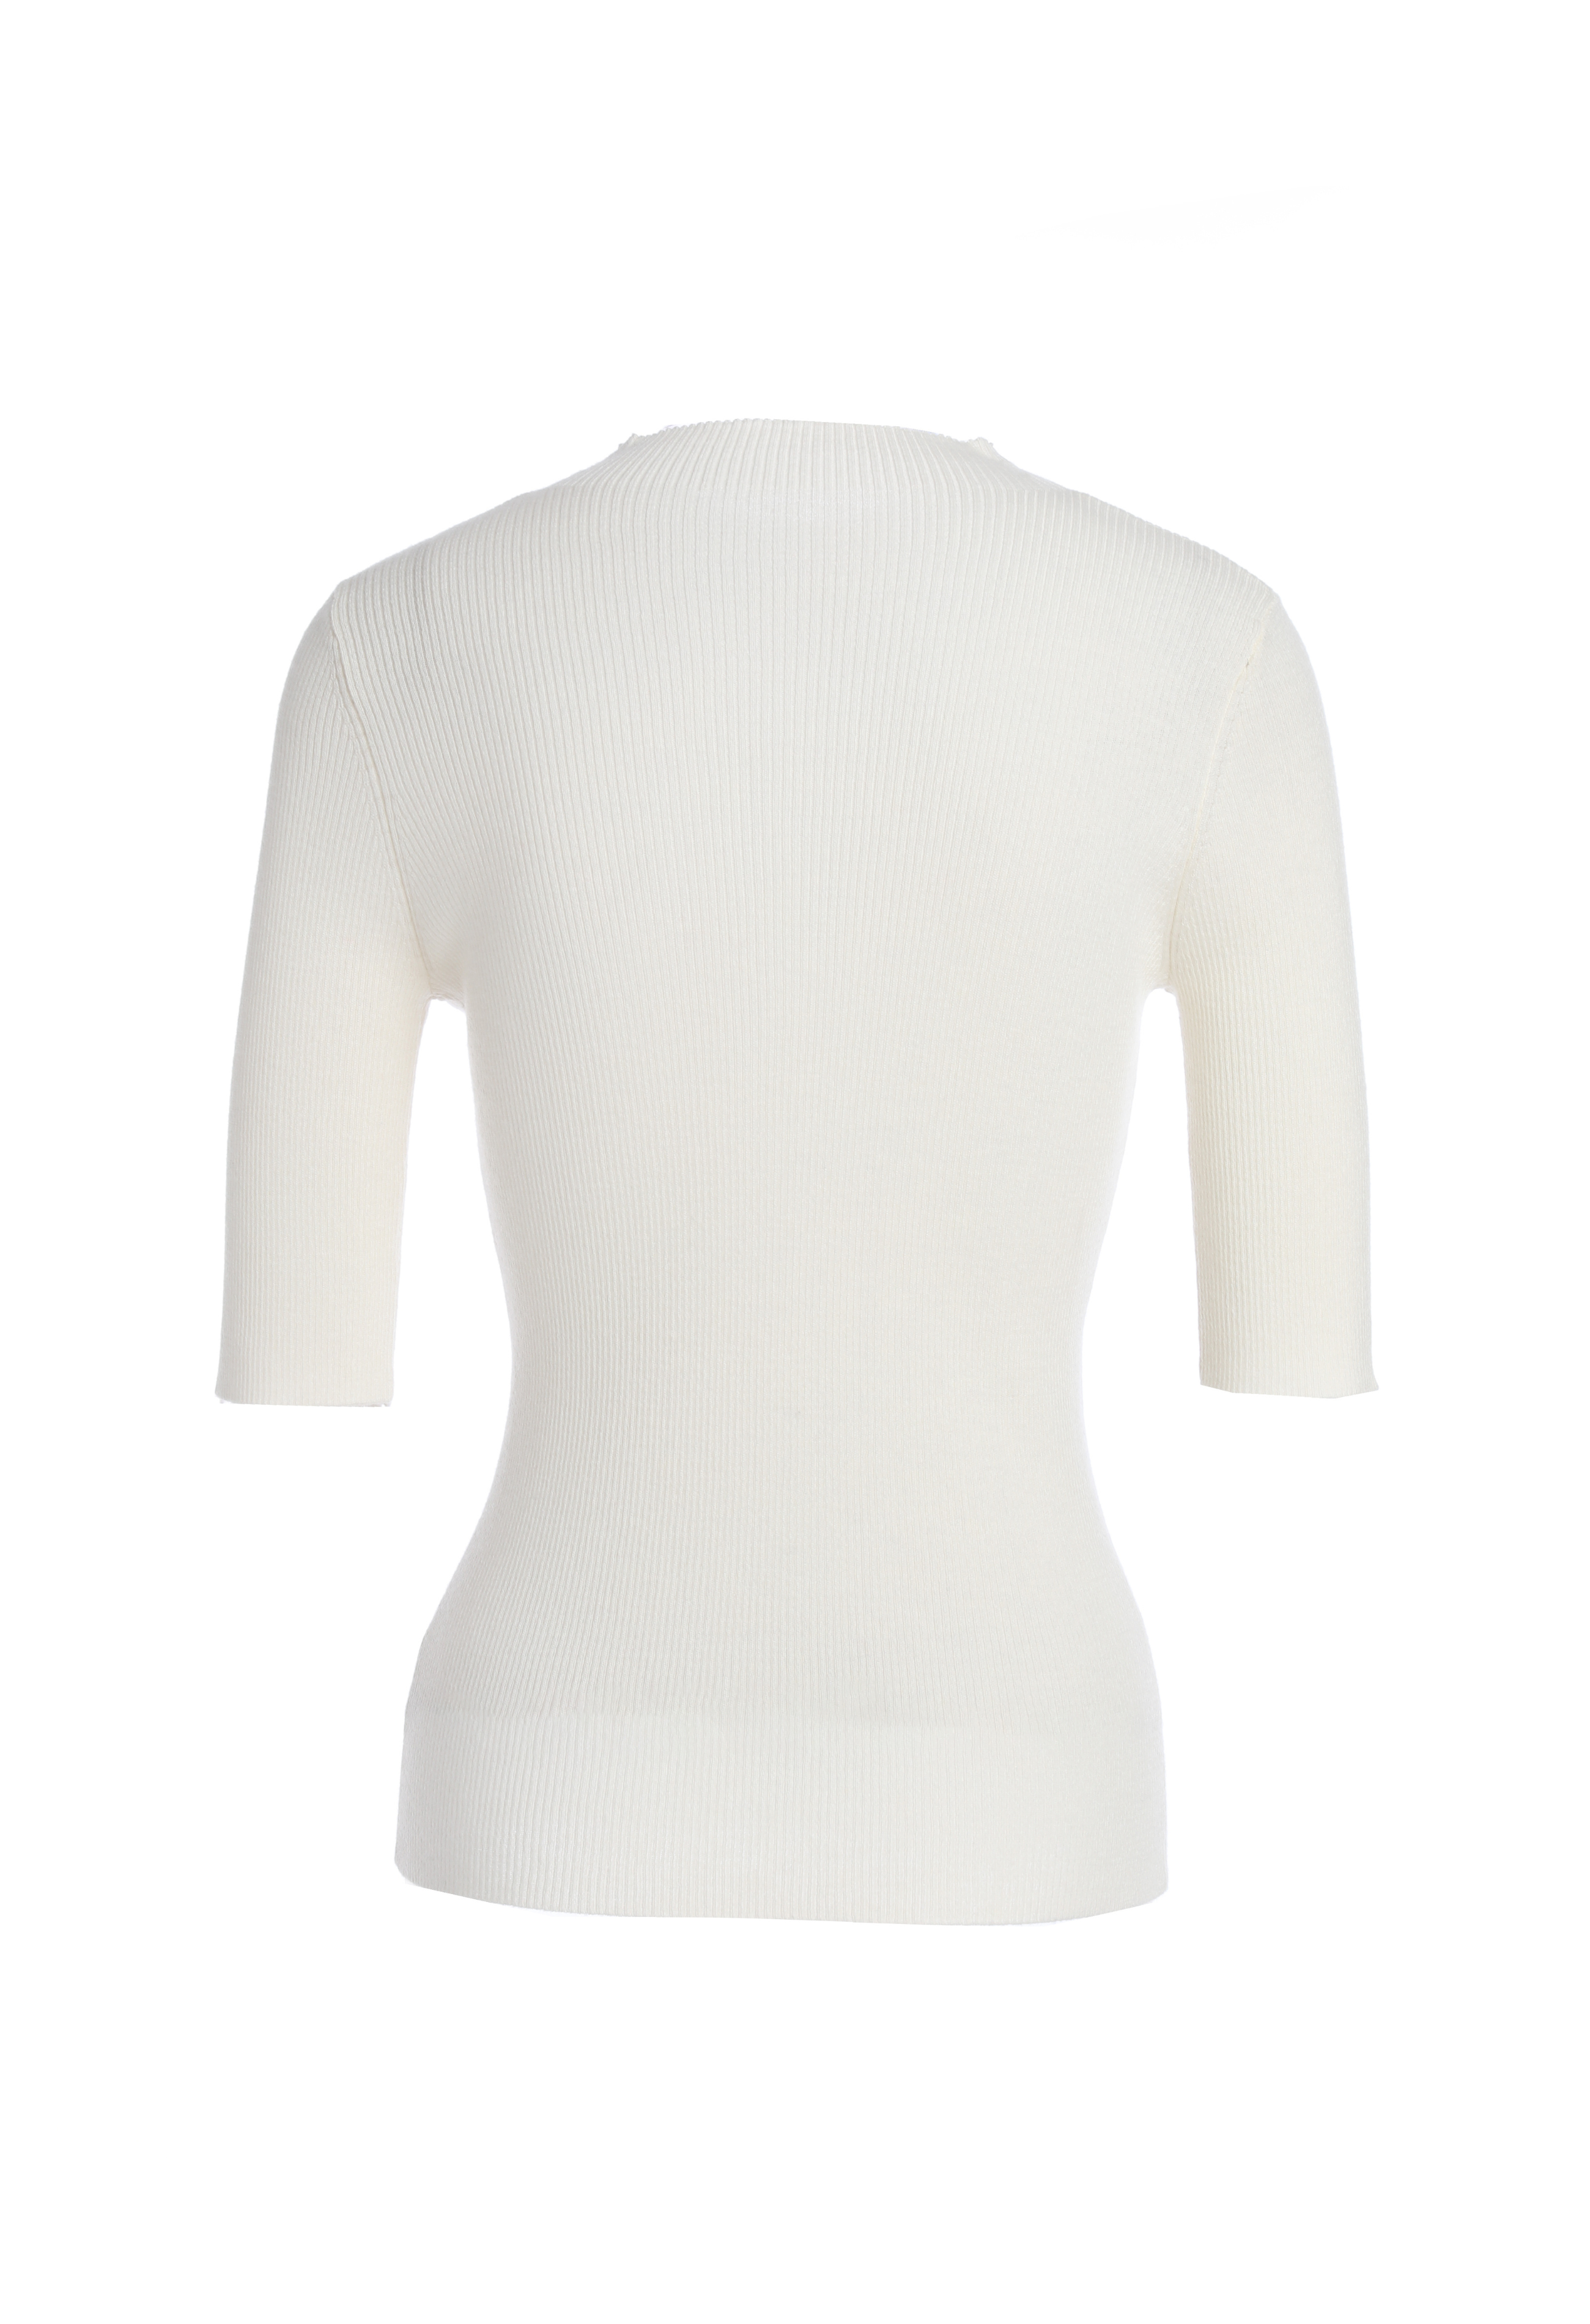 Worsted Cashmere | Women Turtle Neck Shirt | Winter Top | Bellemere New York